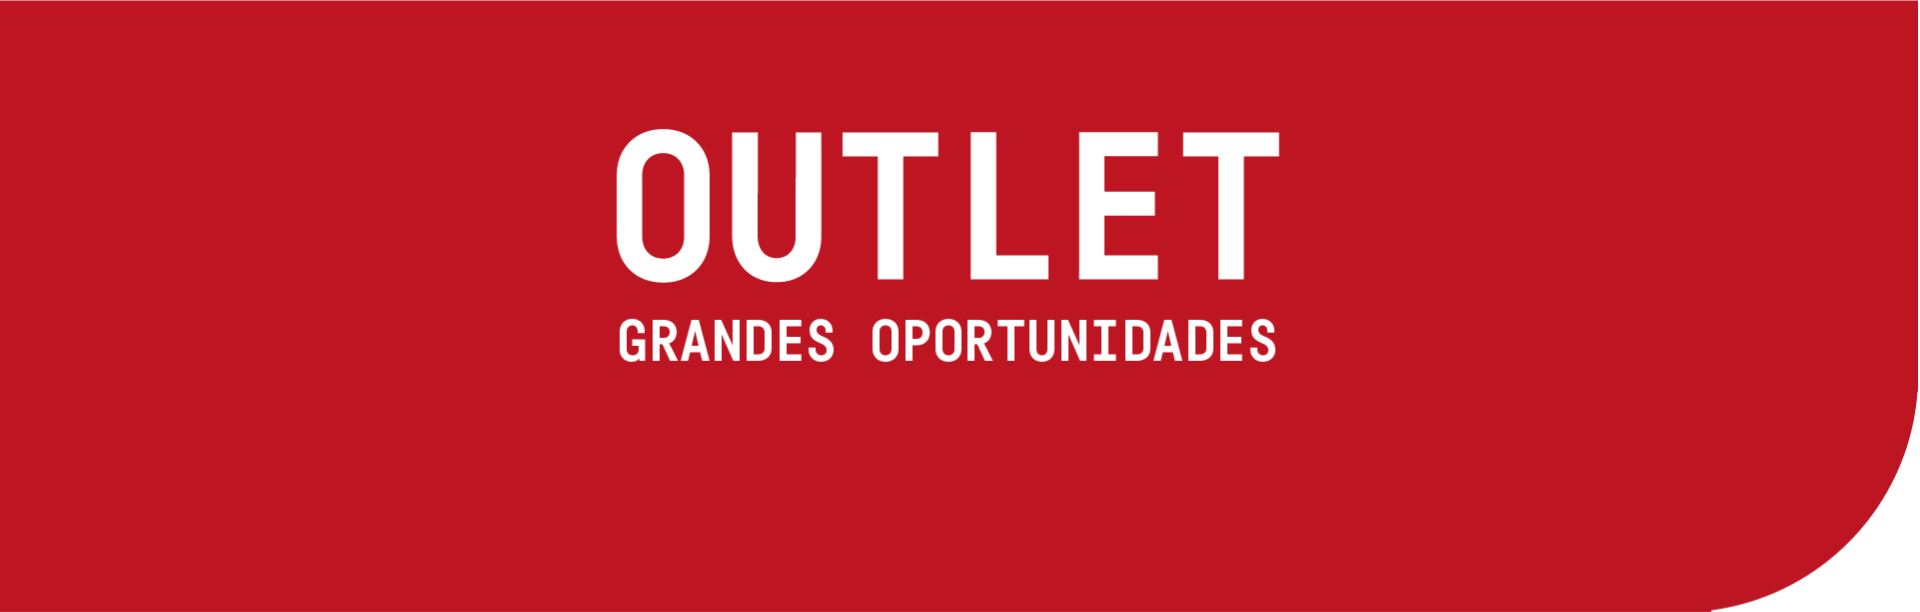 OUTLET 80%